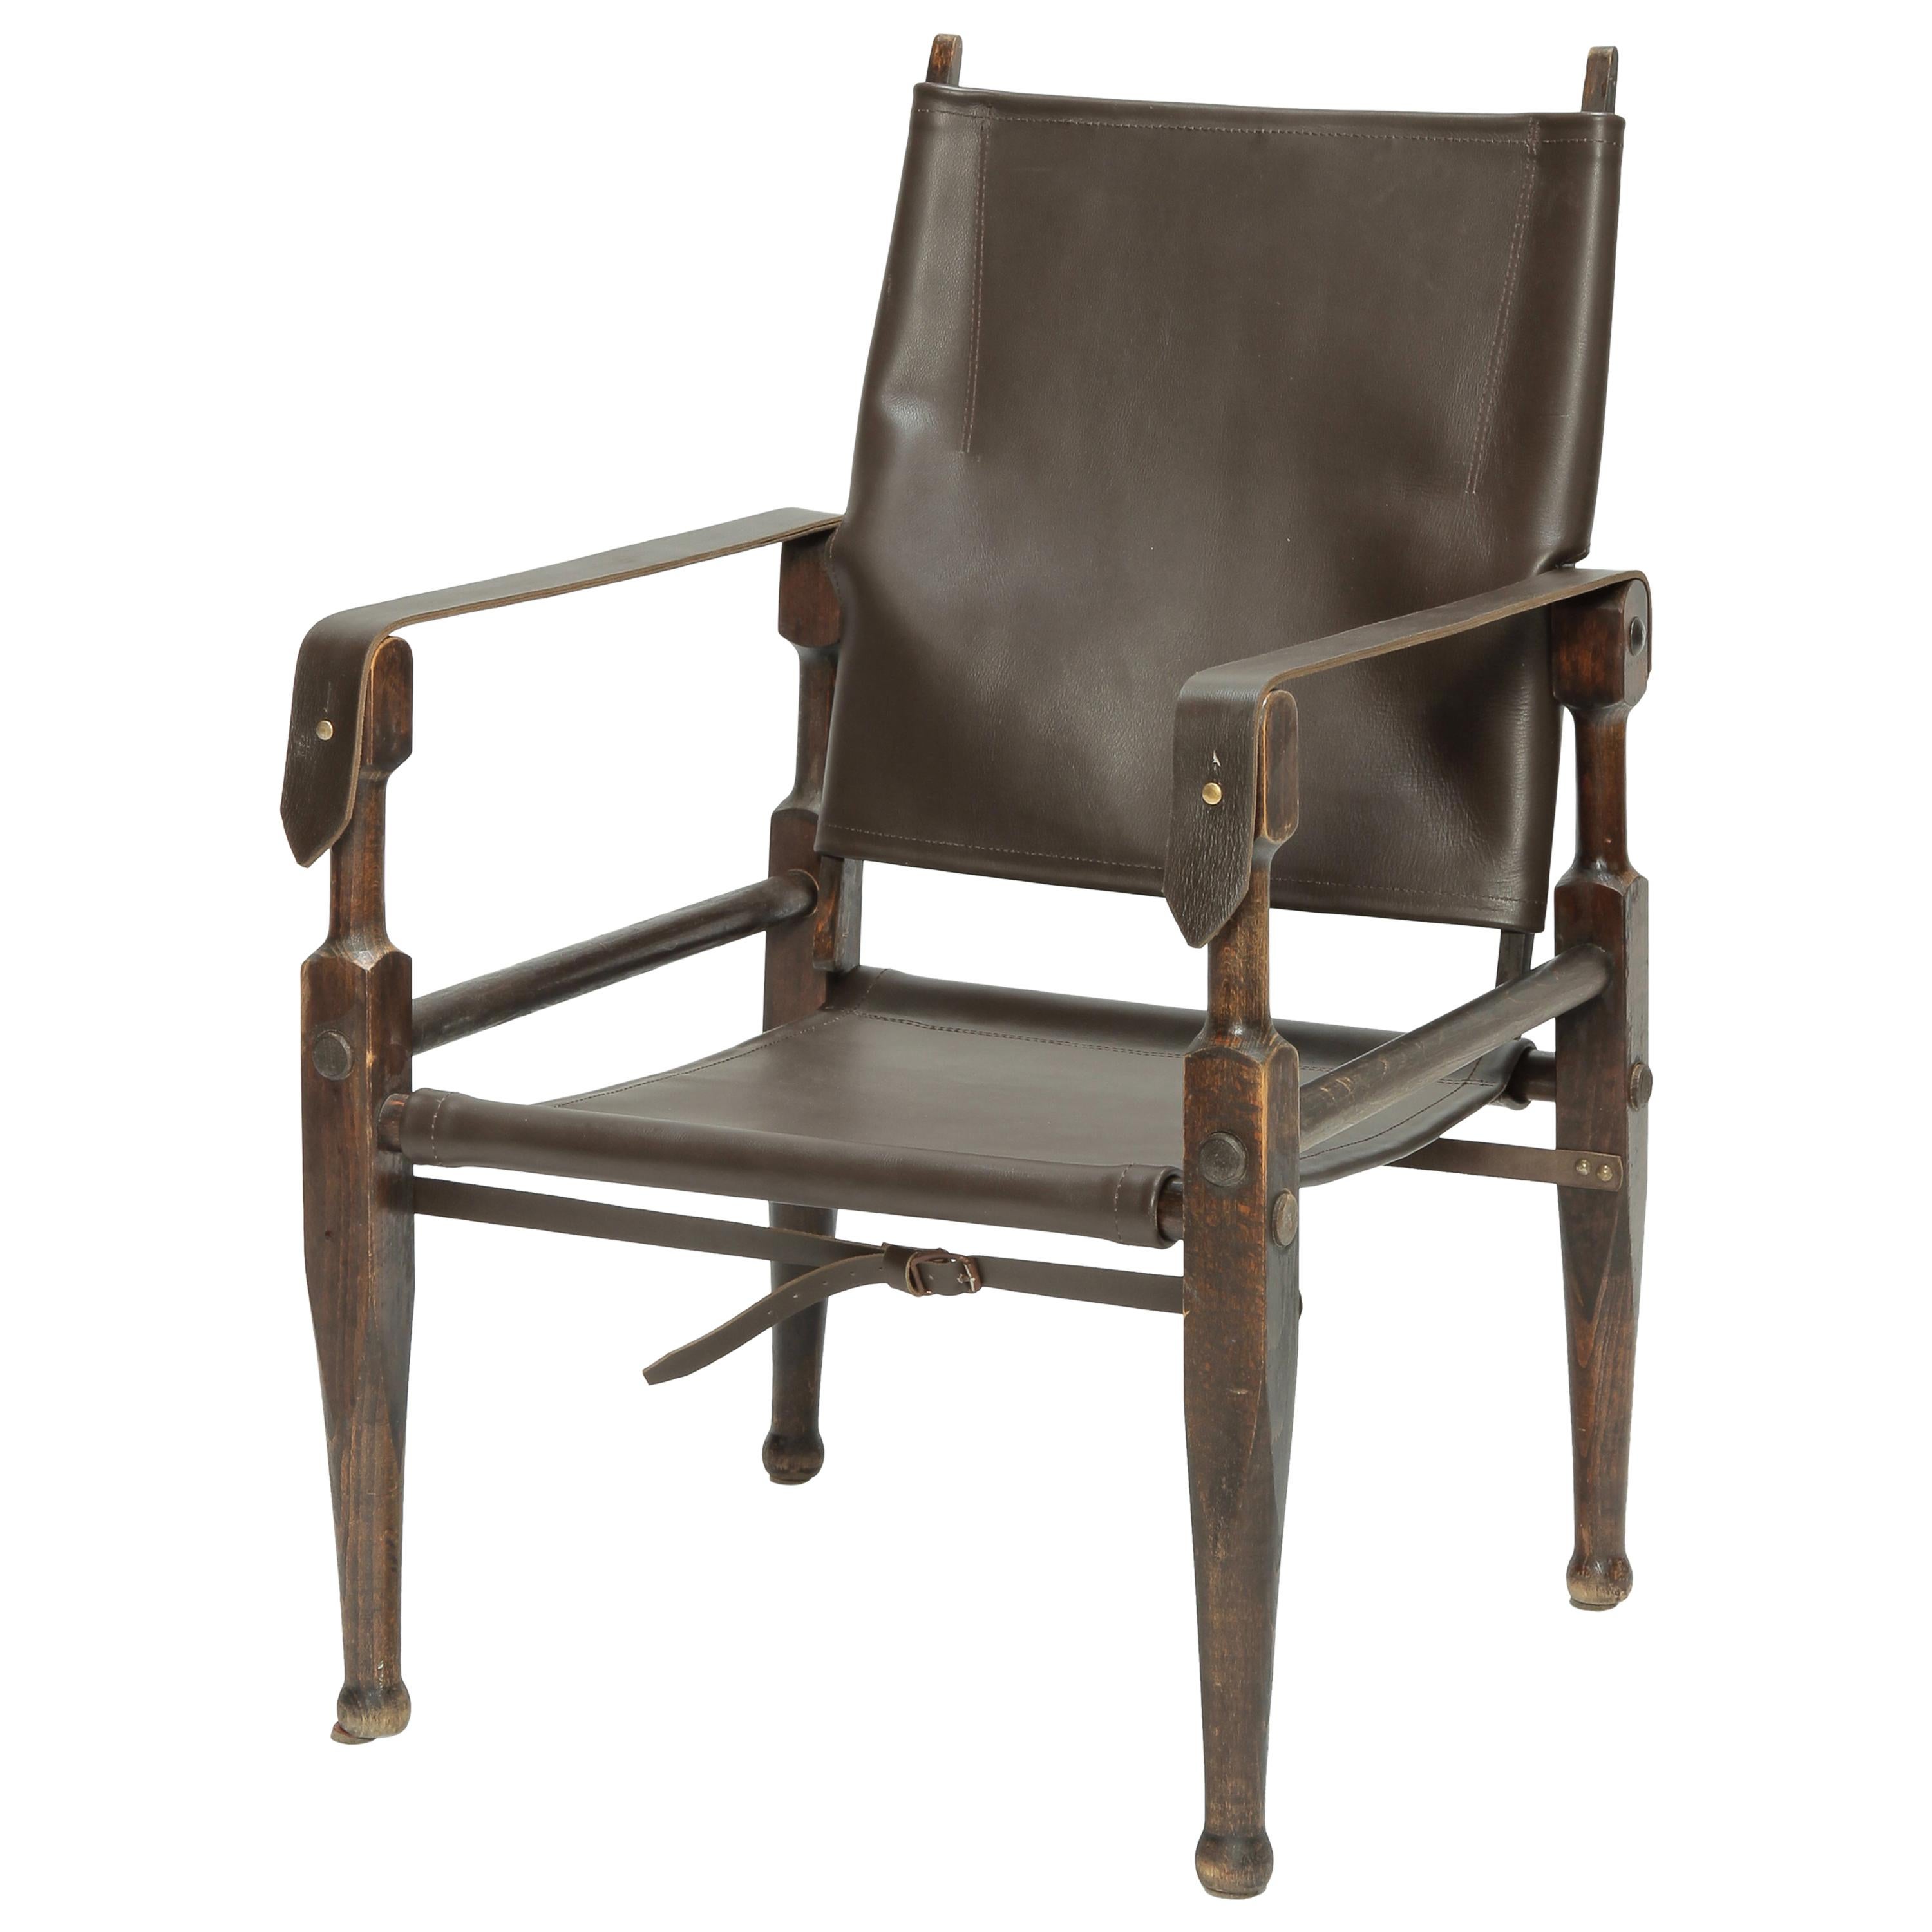 Kienzle Safari Chair by Wohnbedarf 1950s with New Leather For Sale